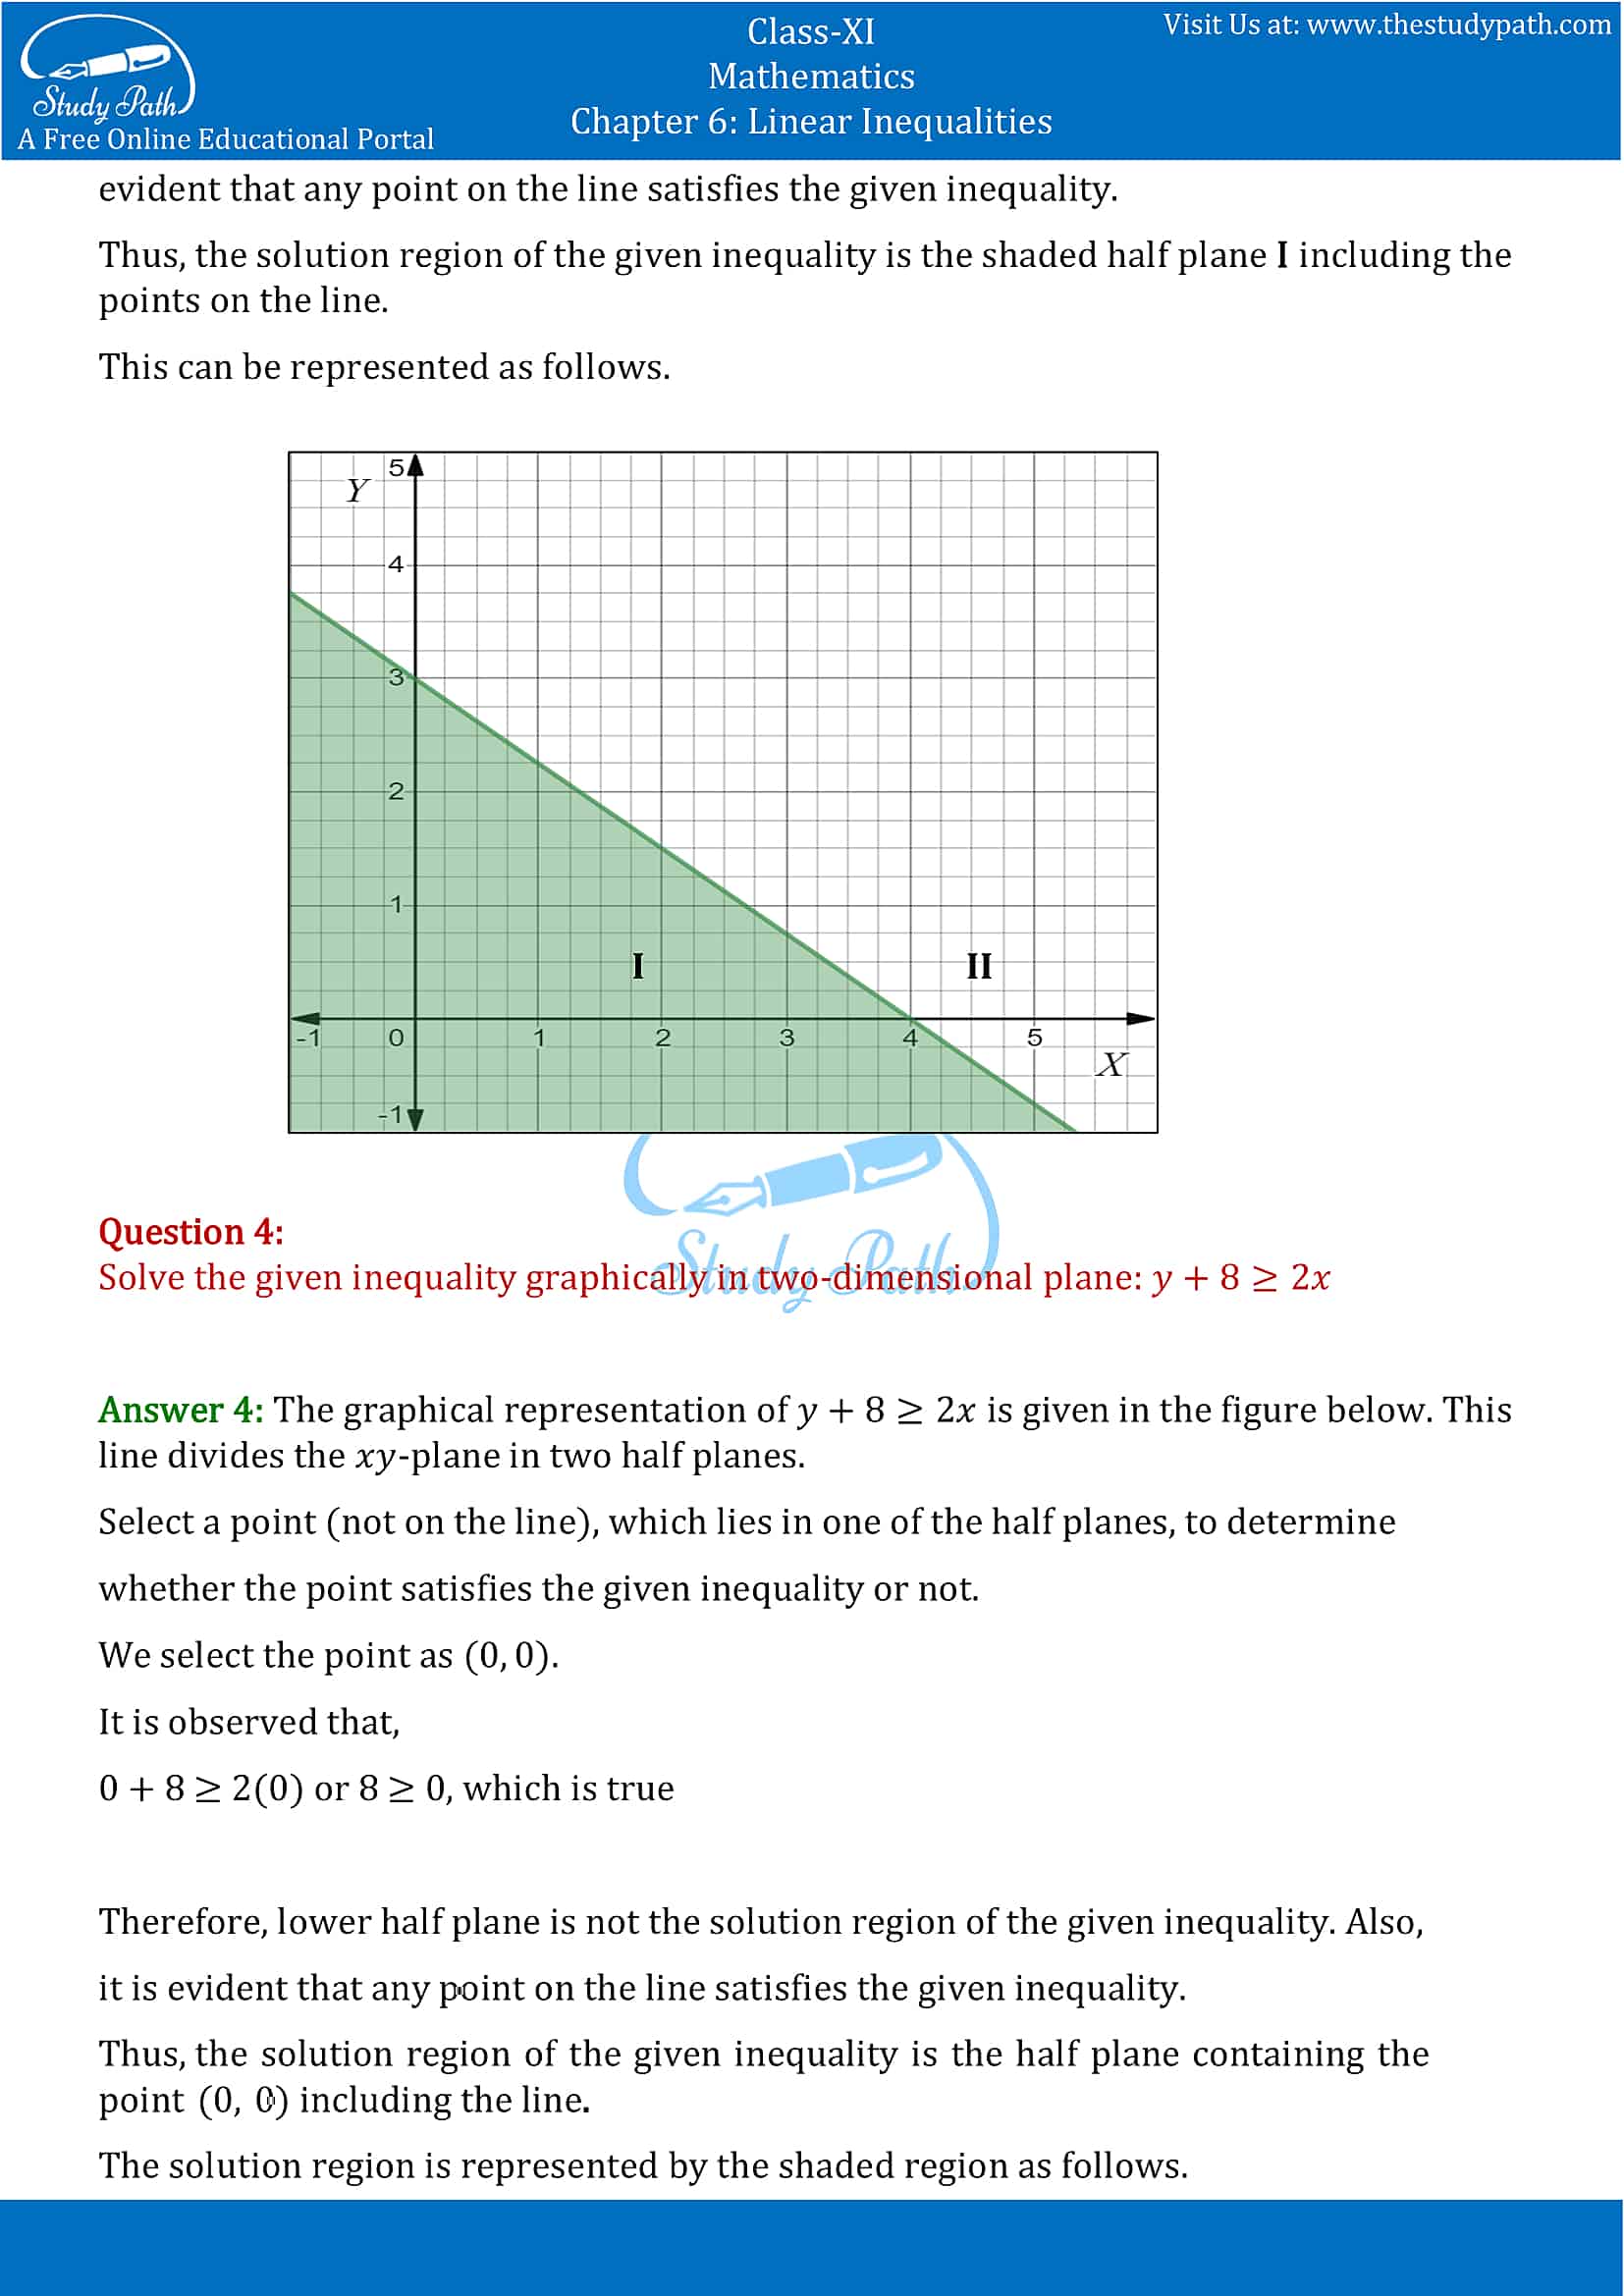 NCERT Solutions for Class 11 Maths chapter 6 Linear Inequalities Exercise 6.2 Part-3